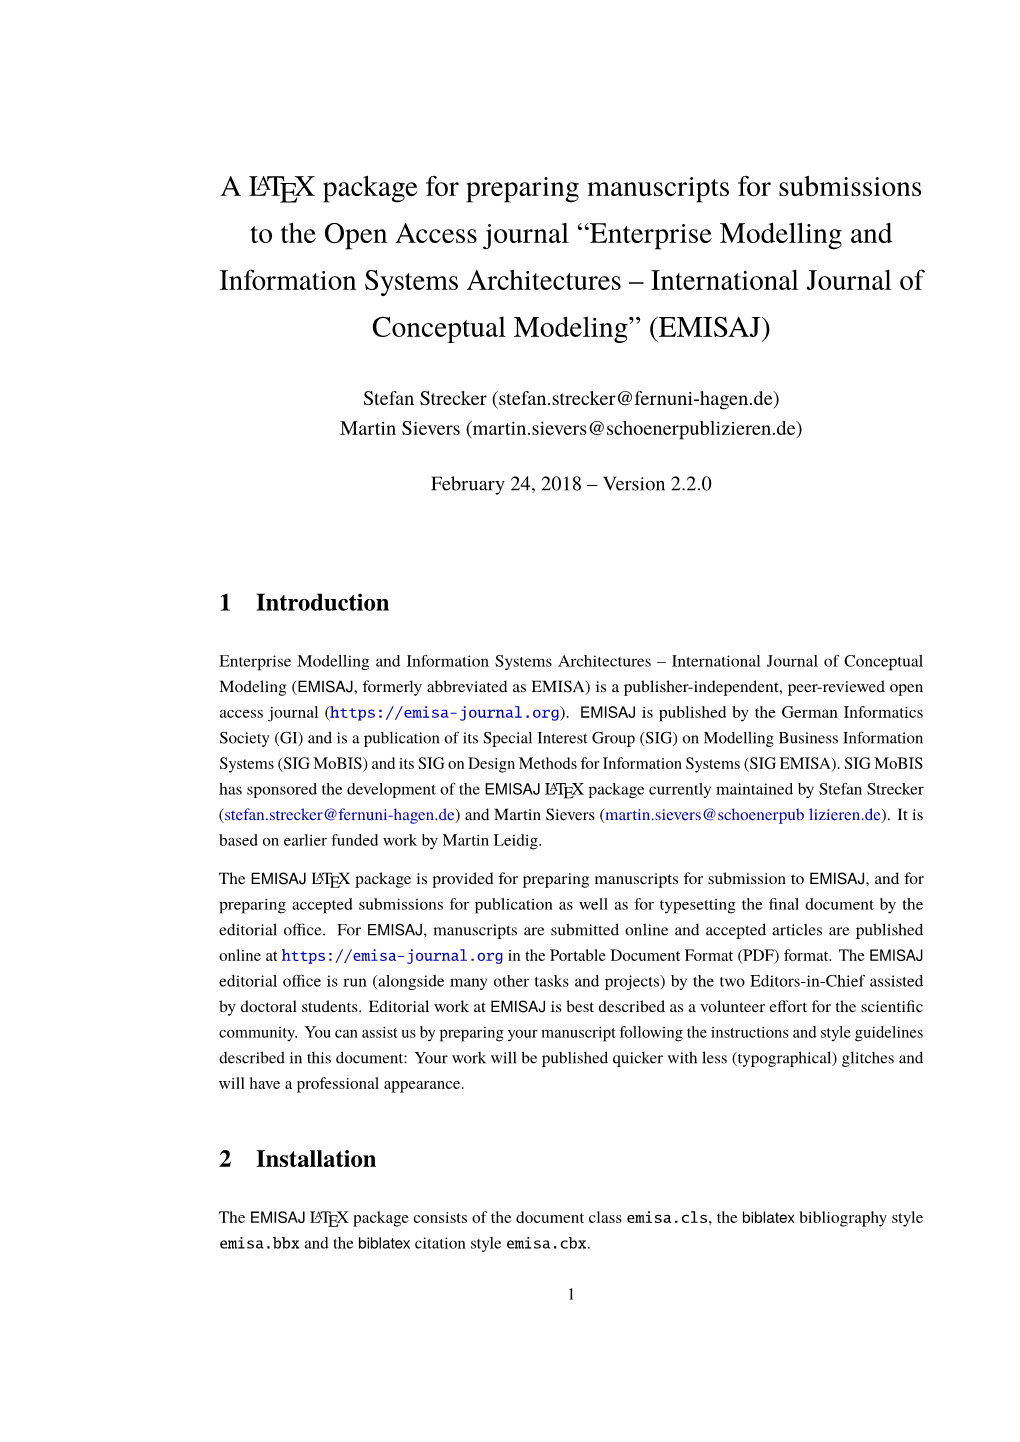 A Latex Package for Preparing Manuscripts for Submissions to the OA Journal Enterprise Modelling and Information Systems Archite